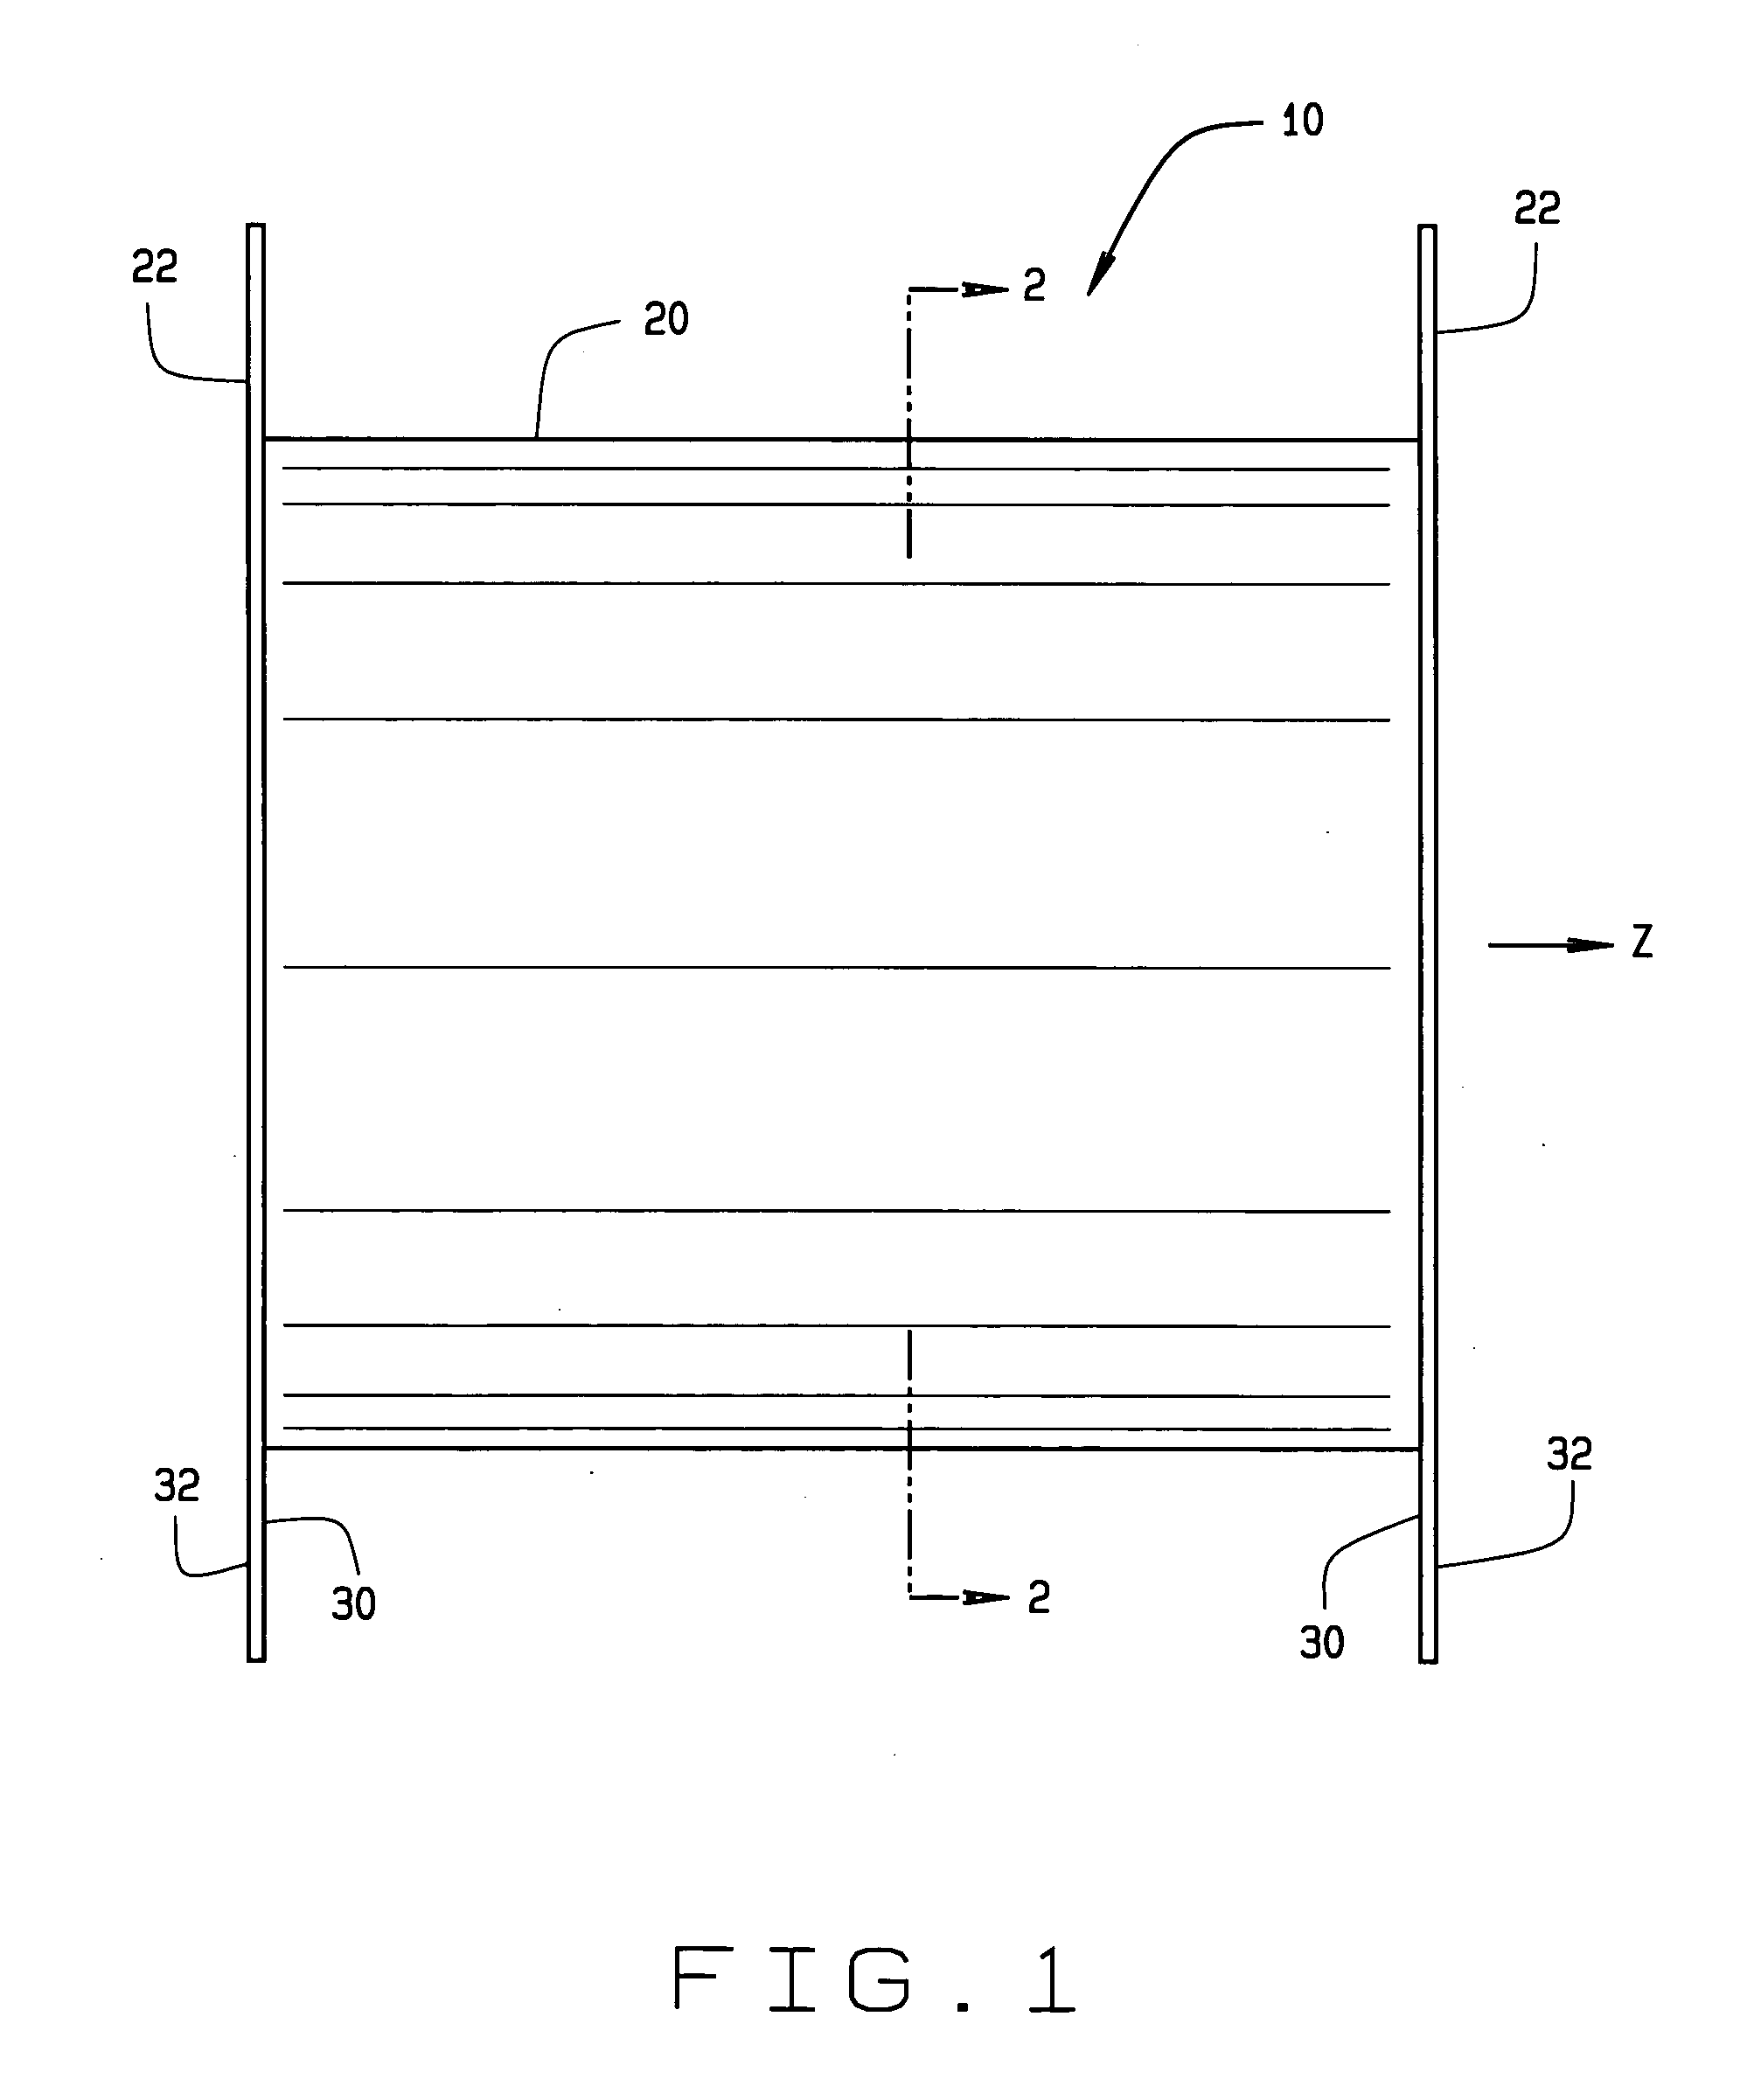 Thermal management apparatus and uses thereof